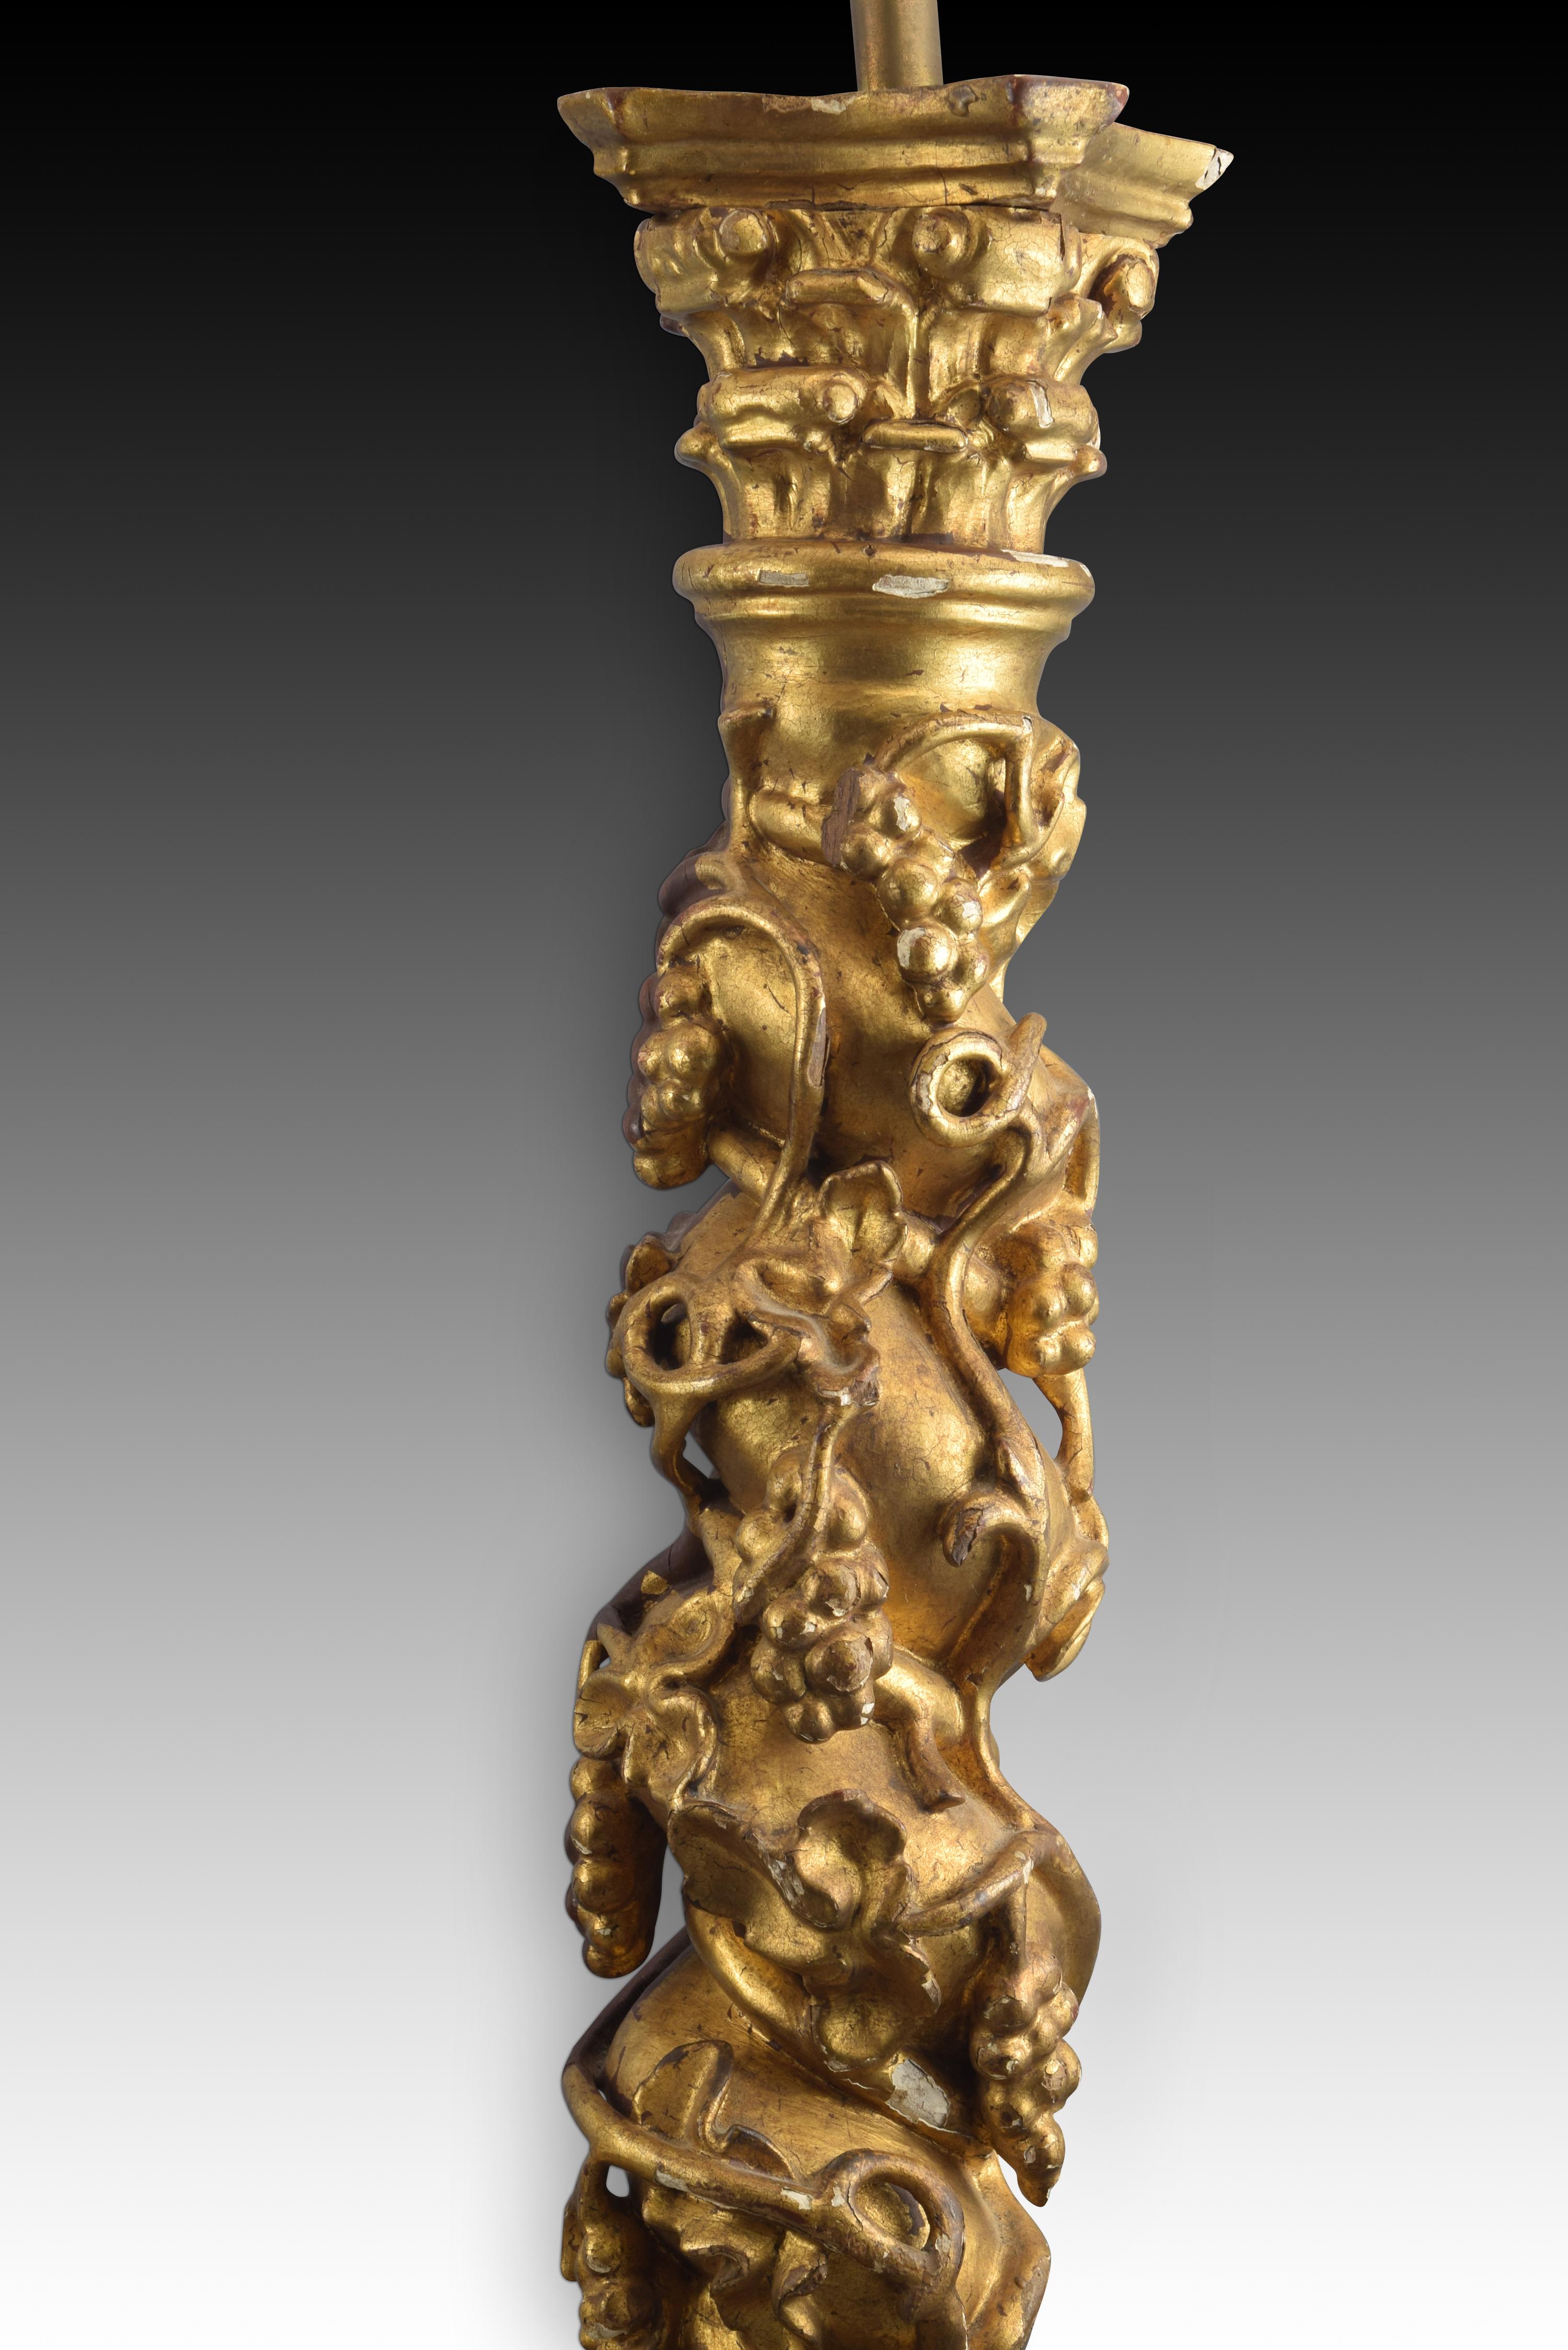 Pair of Solomonic columns adapted to a table lamp. Wood, late 17th century.
Pair of columns with a Solomonic shaft and a Corinthian capital made of carved wood, gilded at the front, with a polygonal base with moldings and an upper finish also with